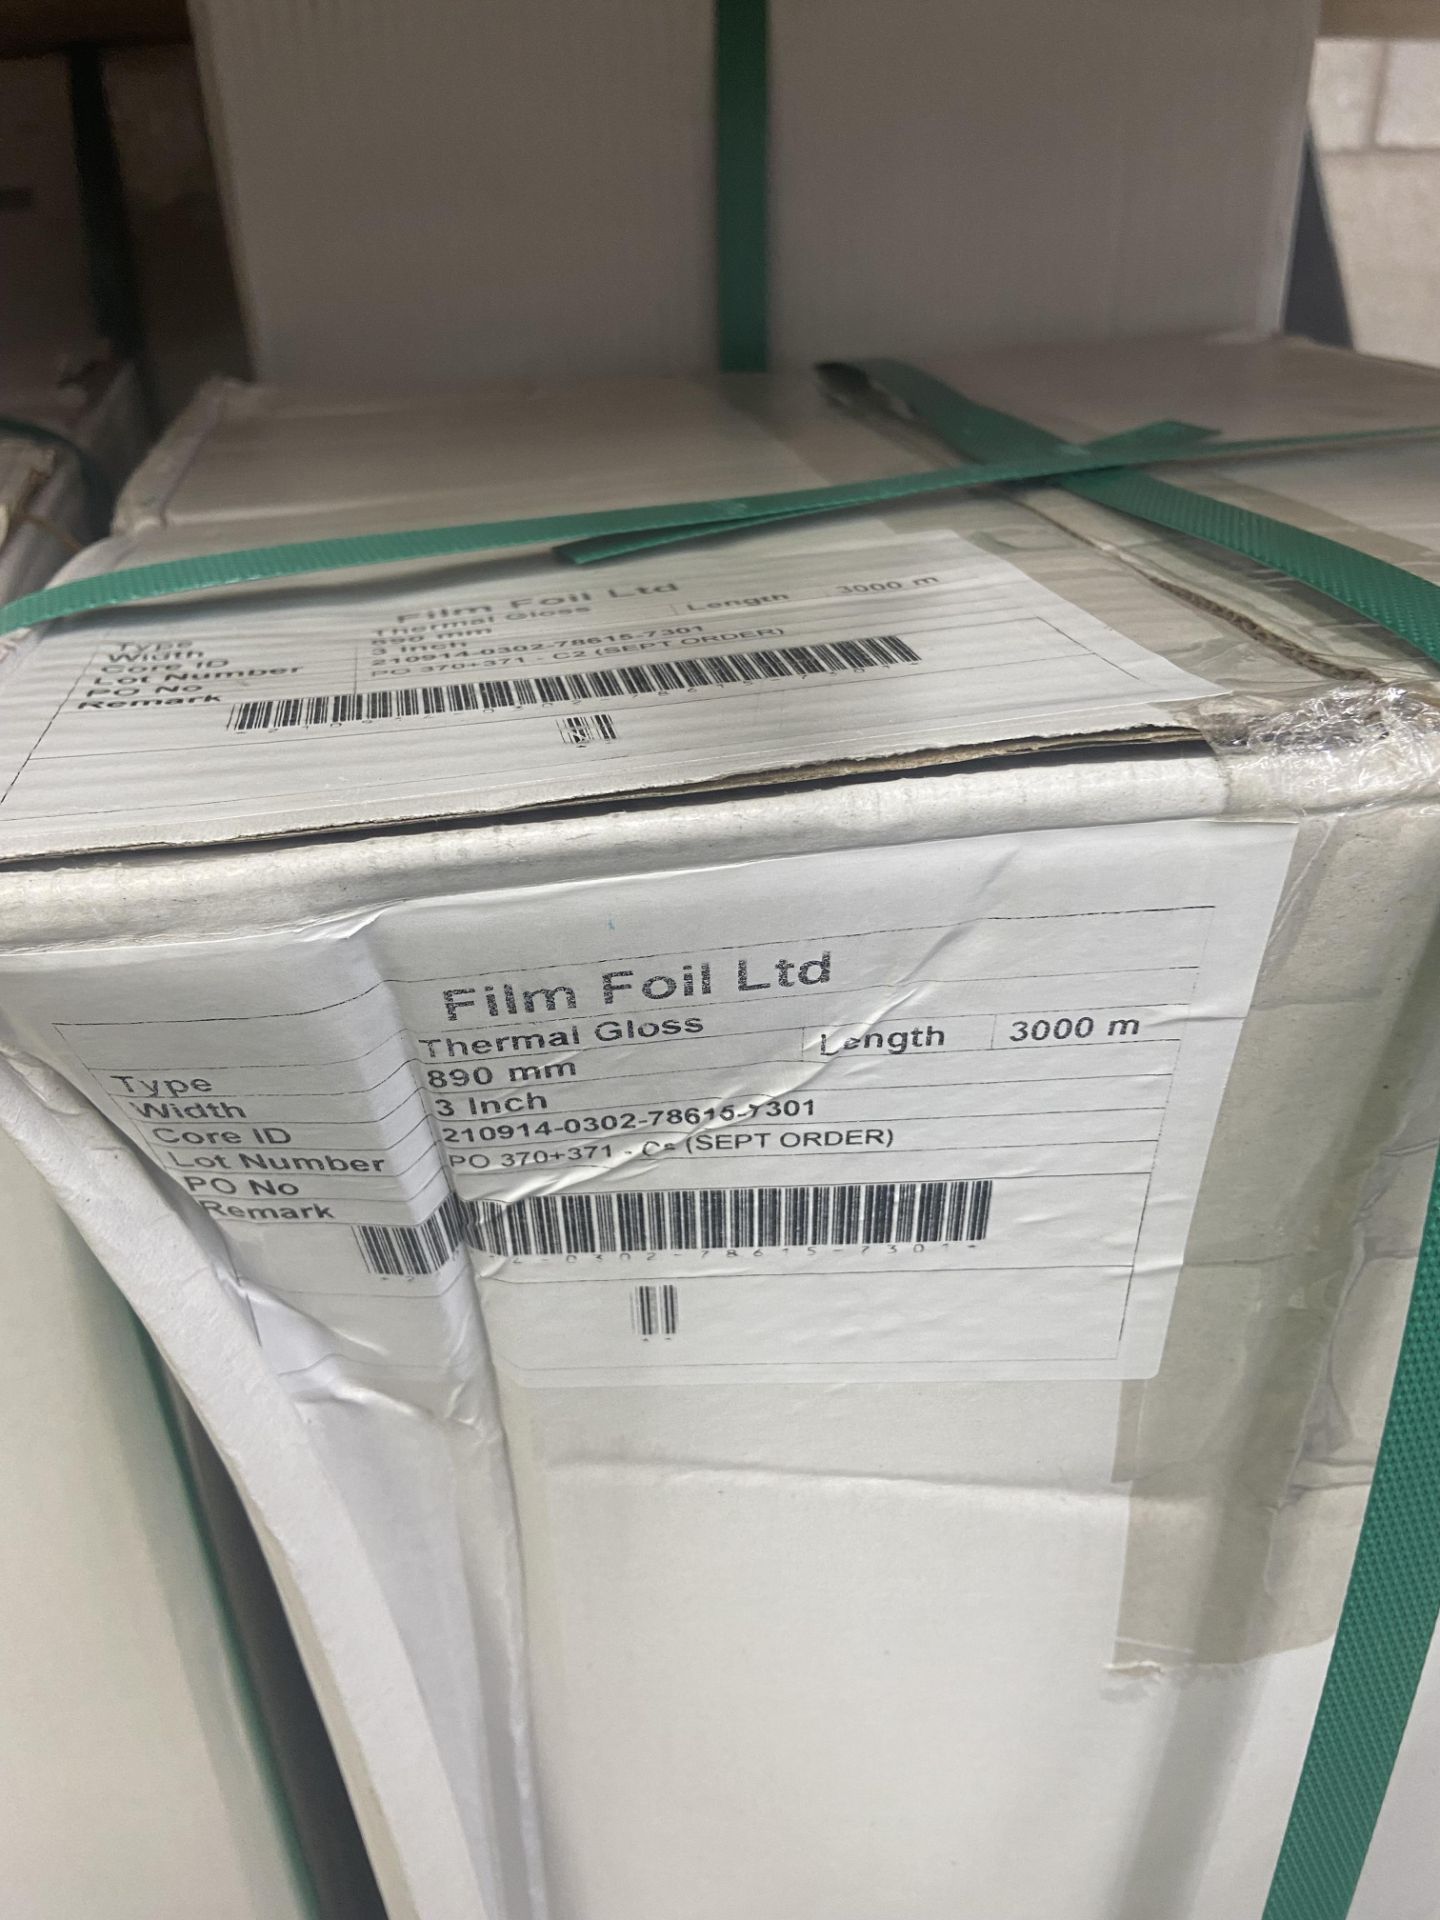 Six Boxes of Film Foil Limited Thermal Gloss Rolls, two x 3000m x 890mm and four x 3000m x 1010mm - Image 2 of 3